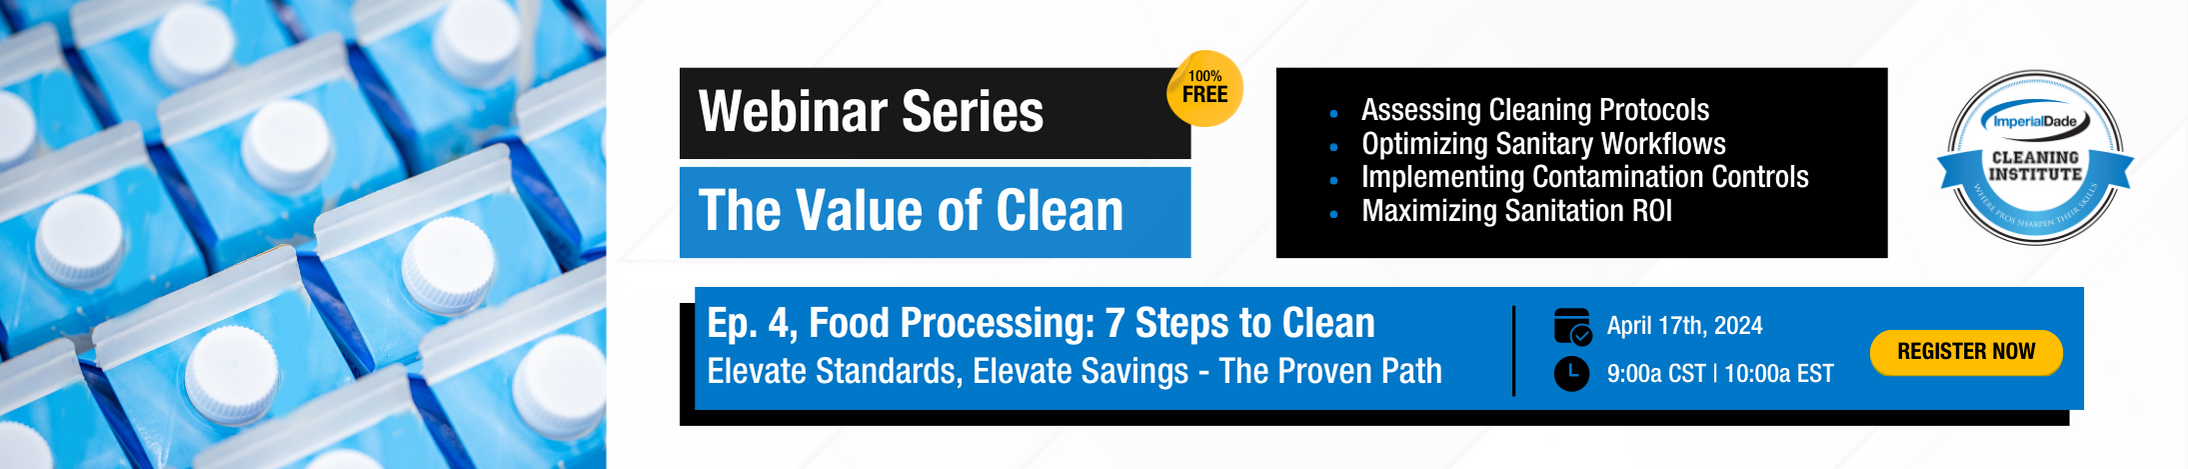 Graphic with text promoting free training webinar for food processing businesses, titled Food Processing: 7 Steps to Clean